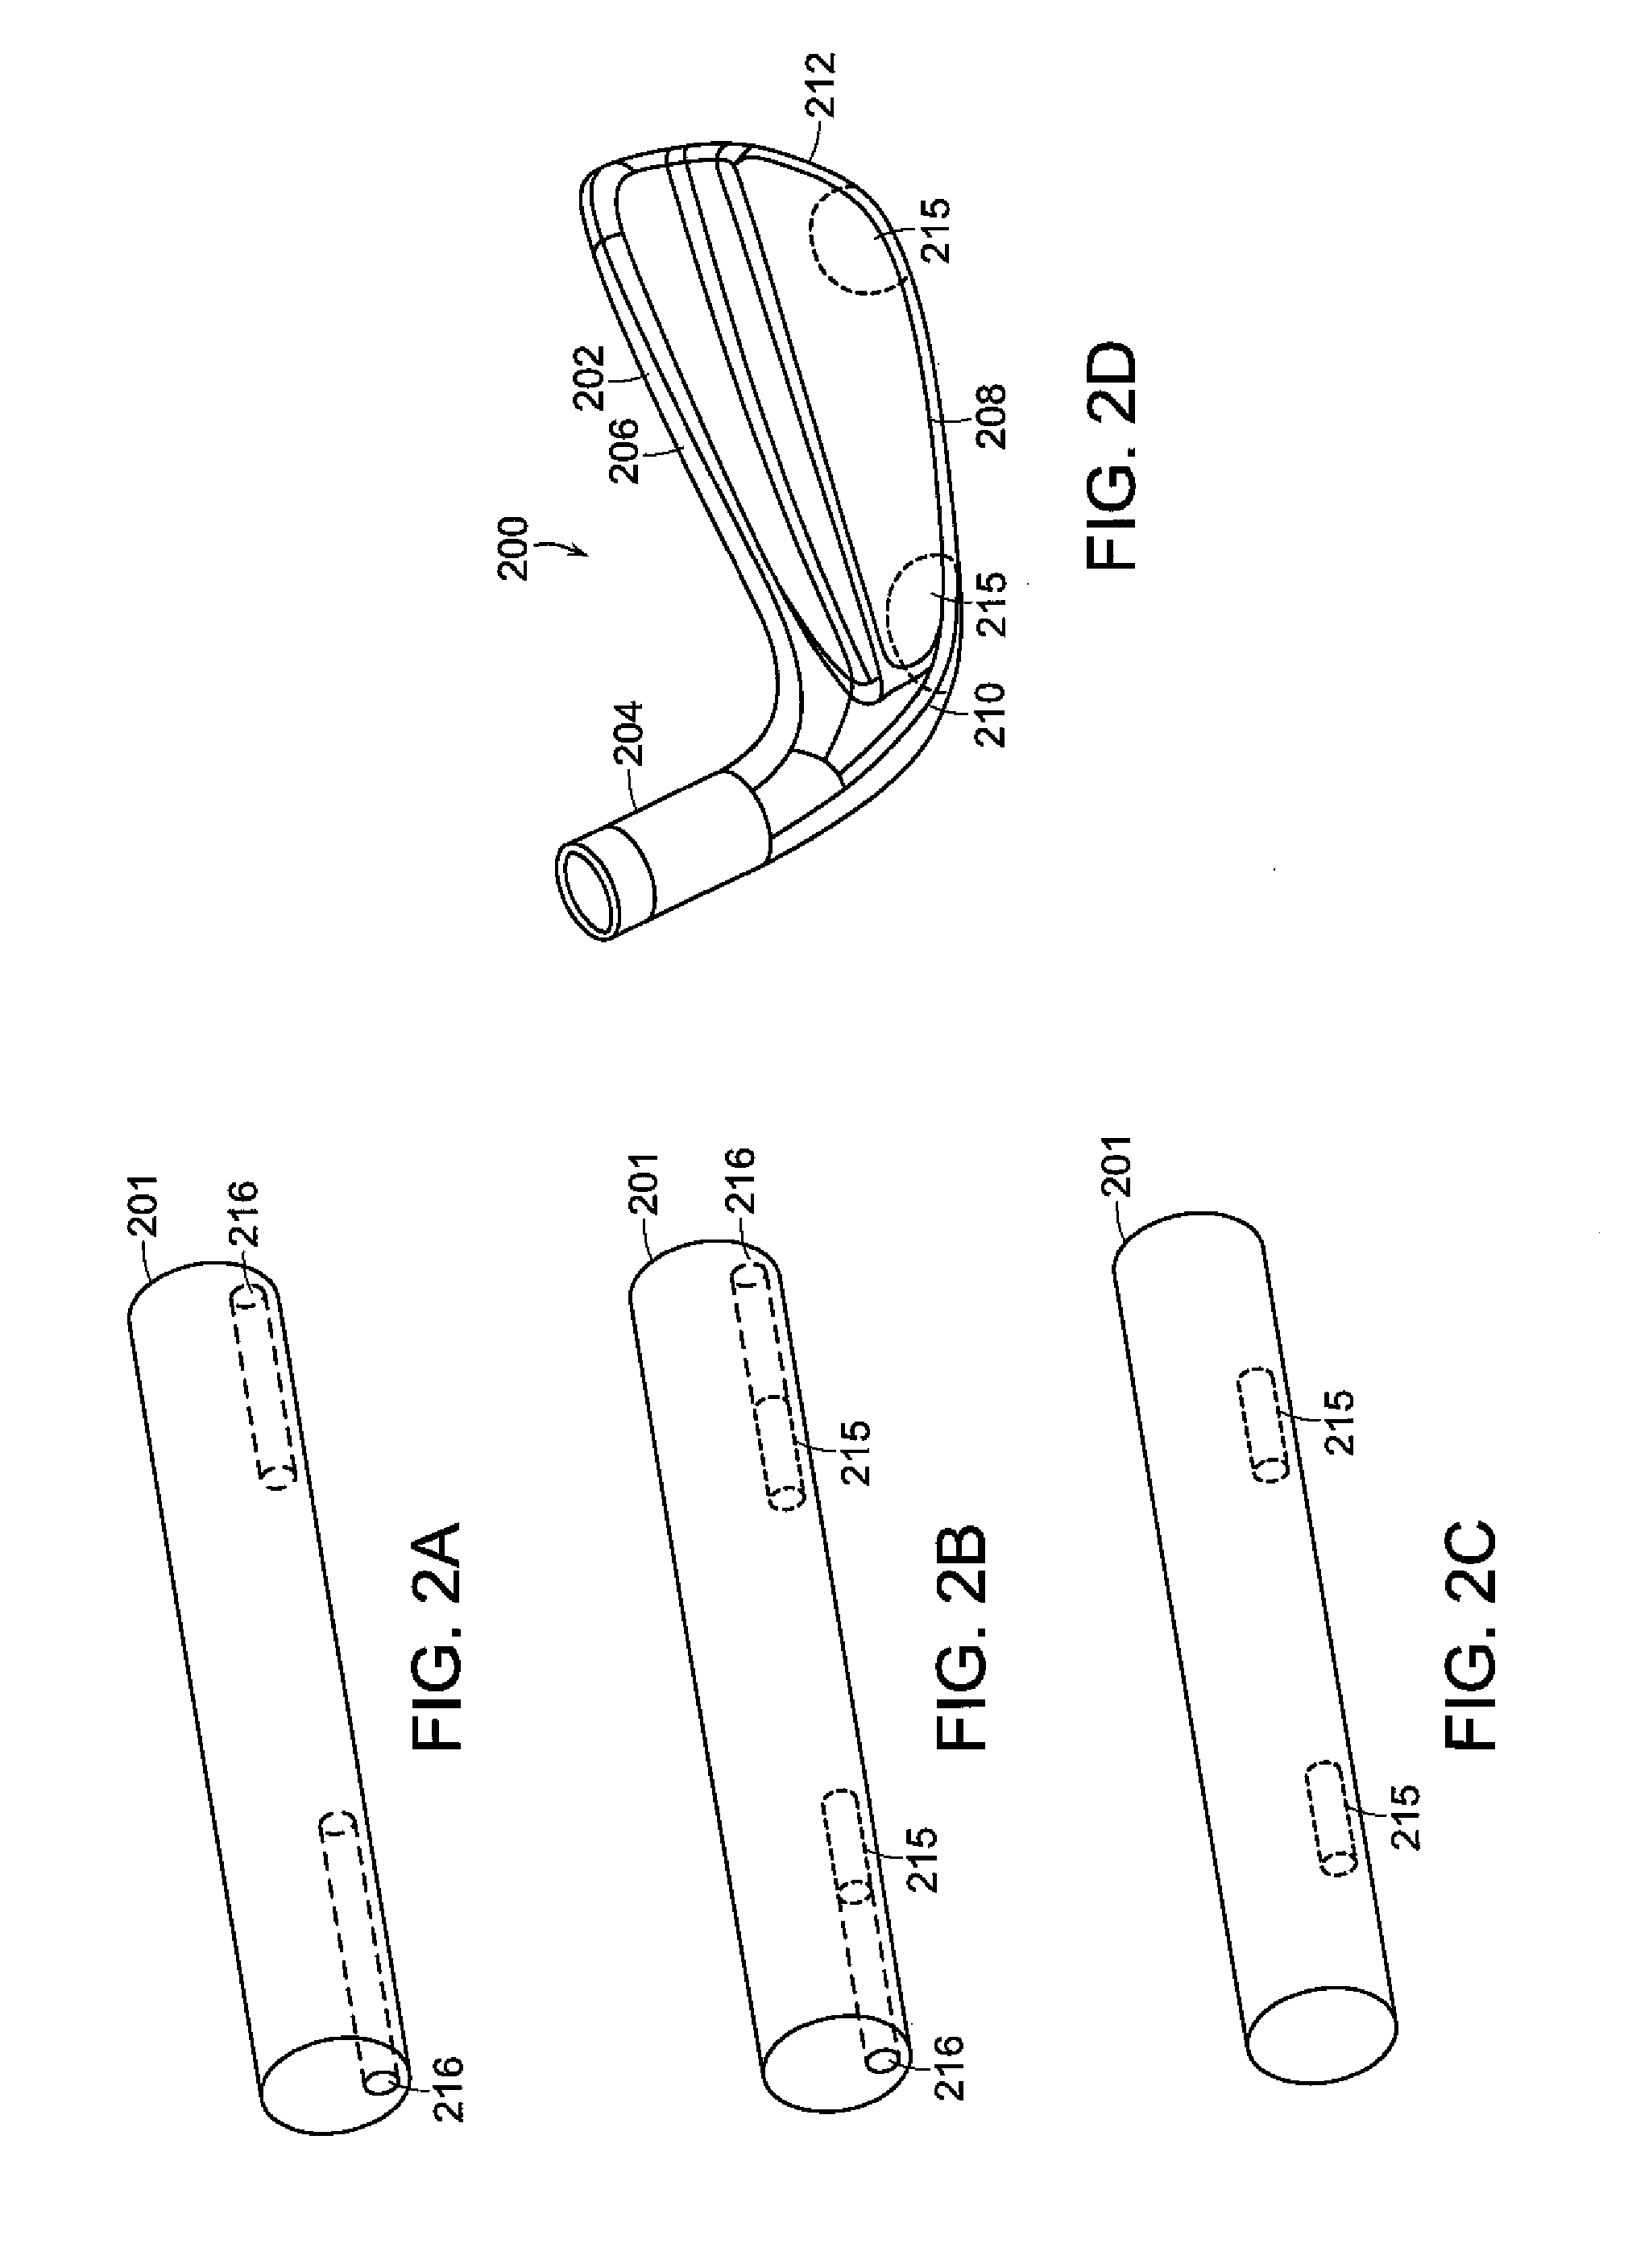 Co-forged golf club head and method of manufacture